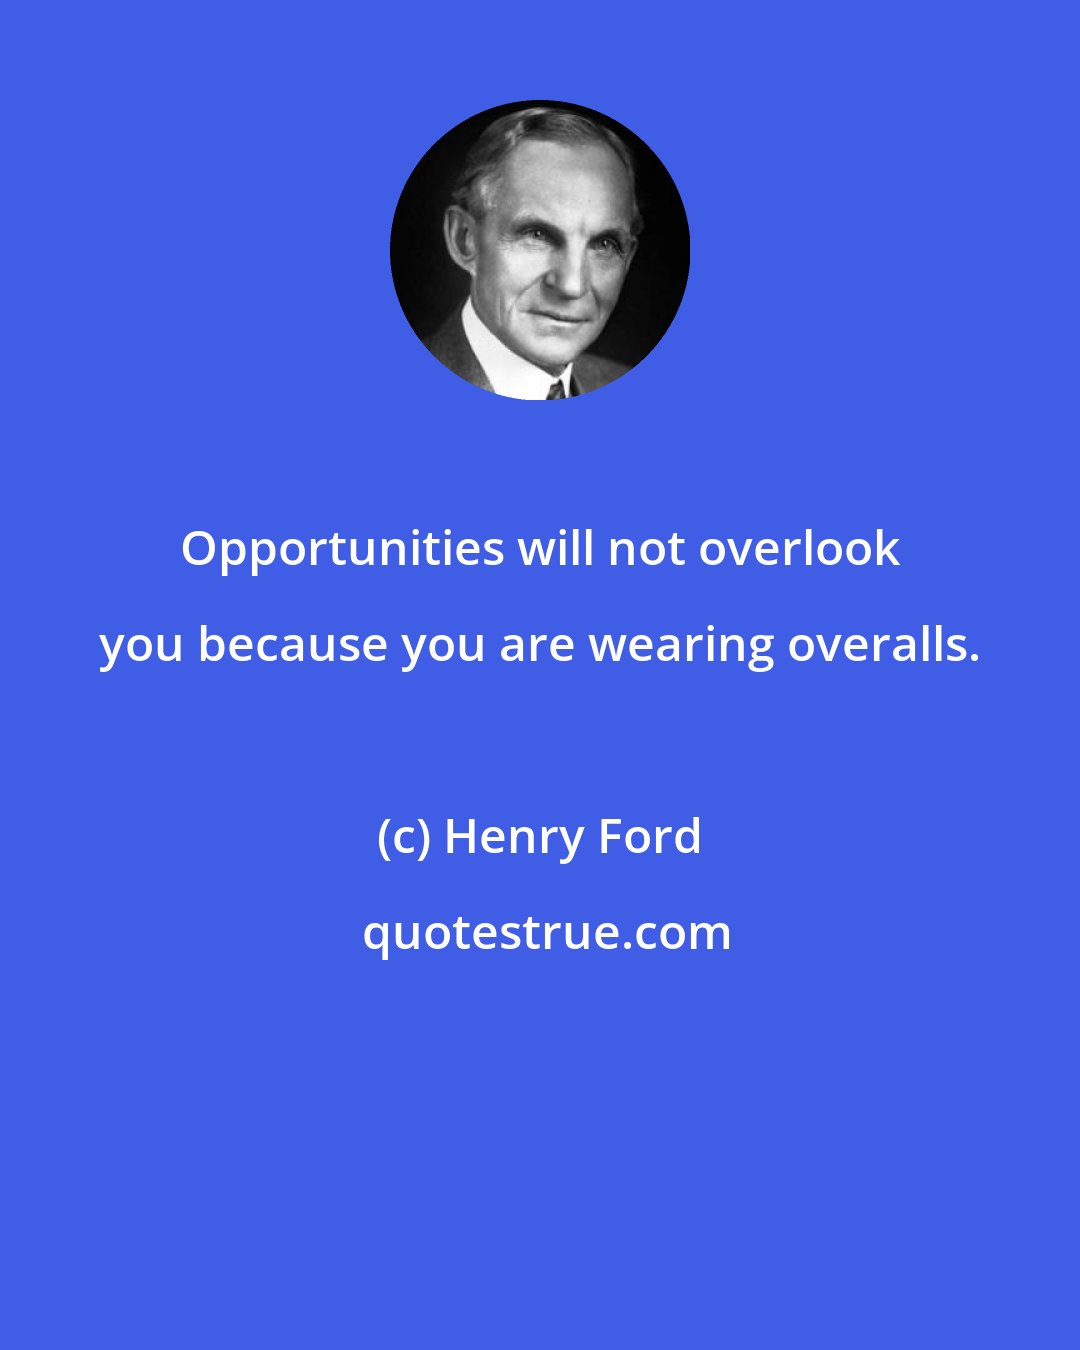 Henry Ford: Opportunities will not overlook you because you are wearing overalls.